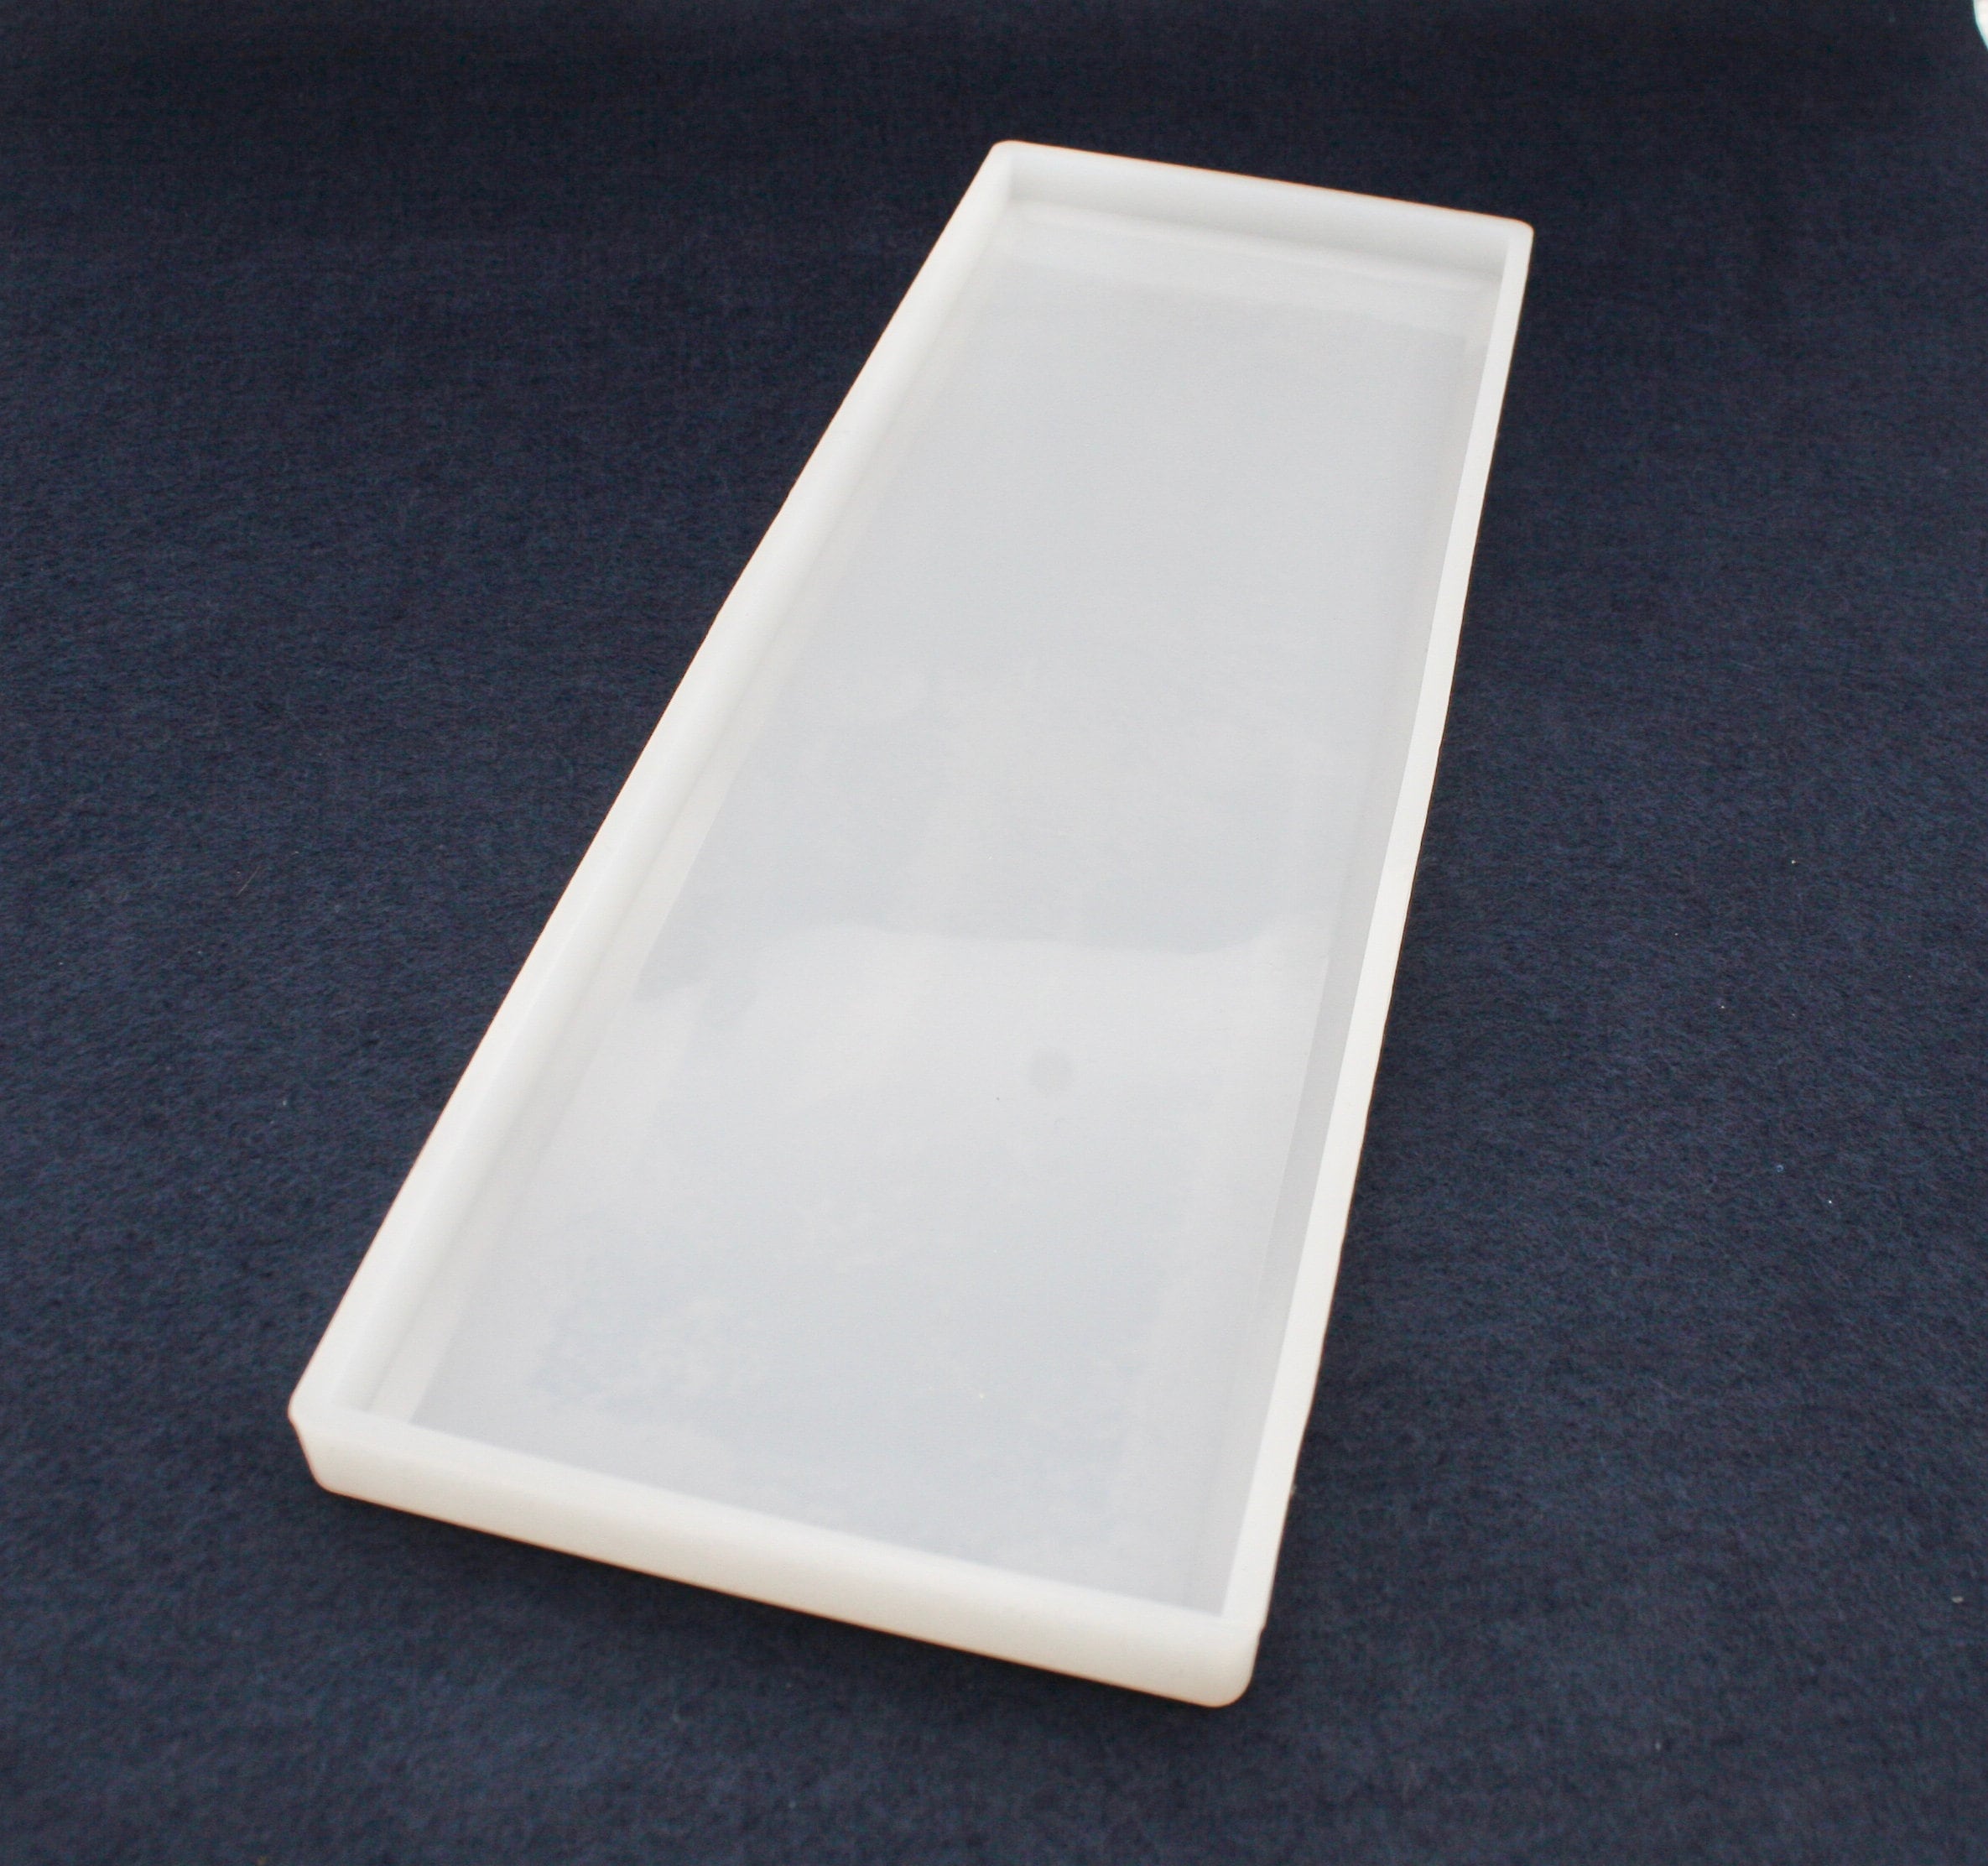 Silicon Resin 12x16 Rectangle Tray Mold at Rs 310/piece